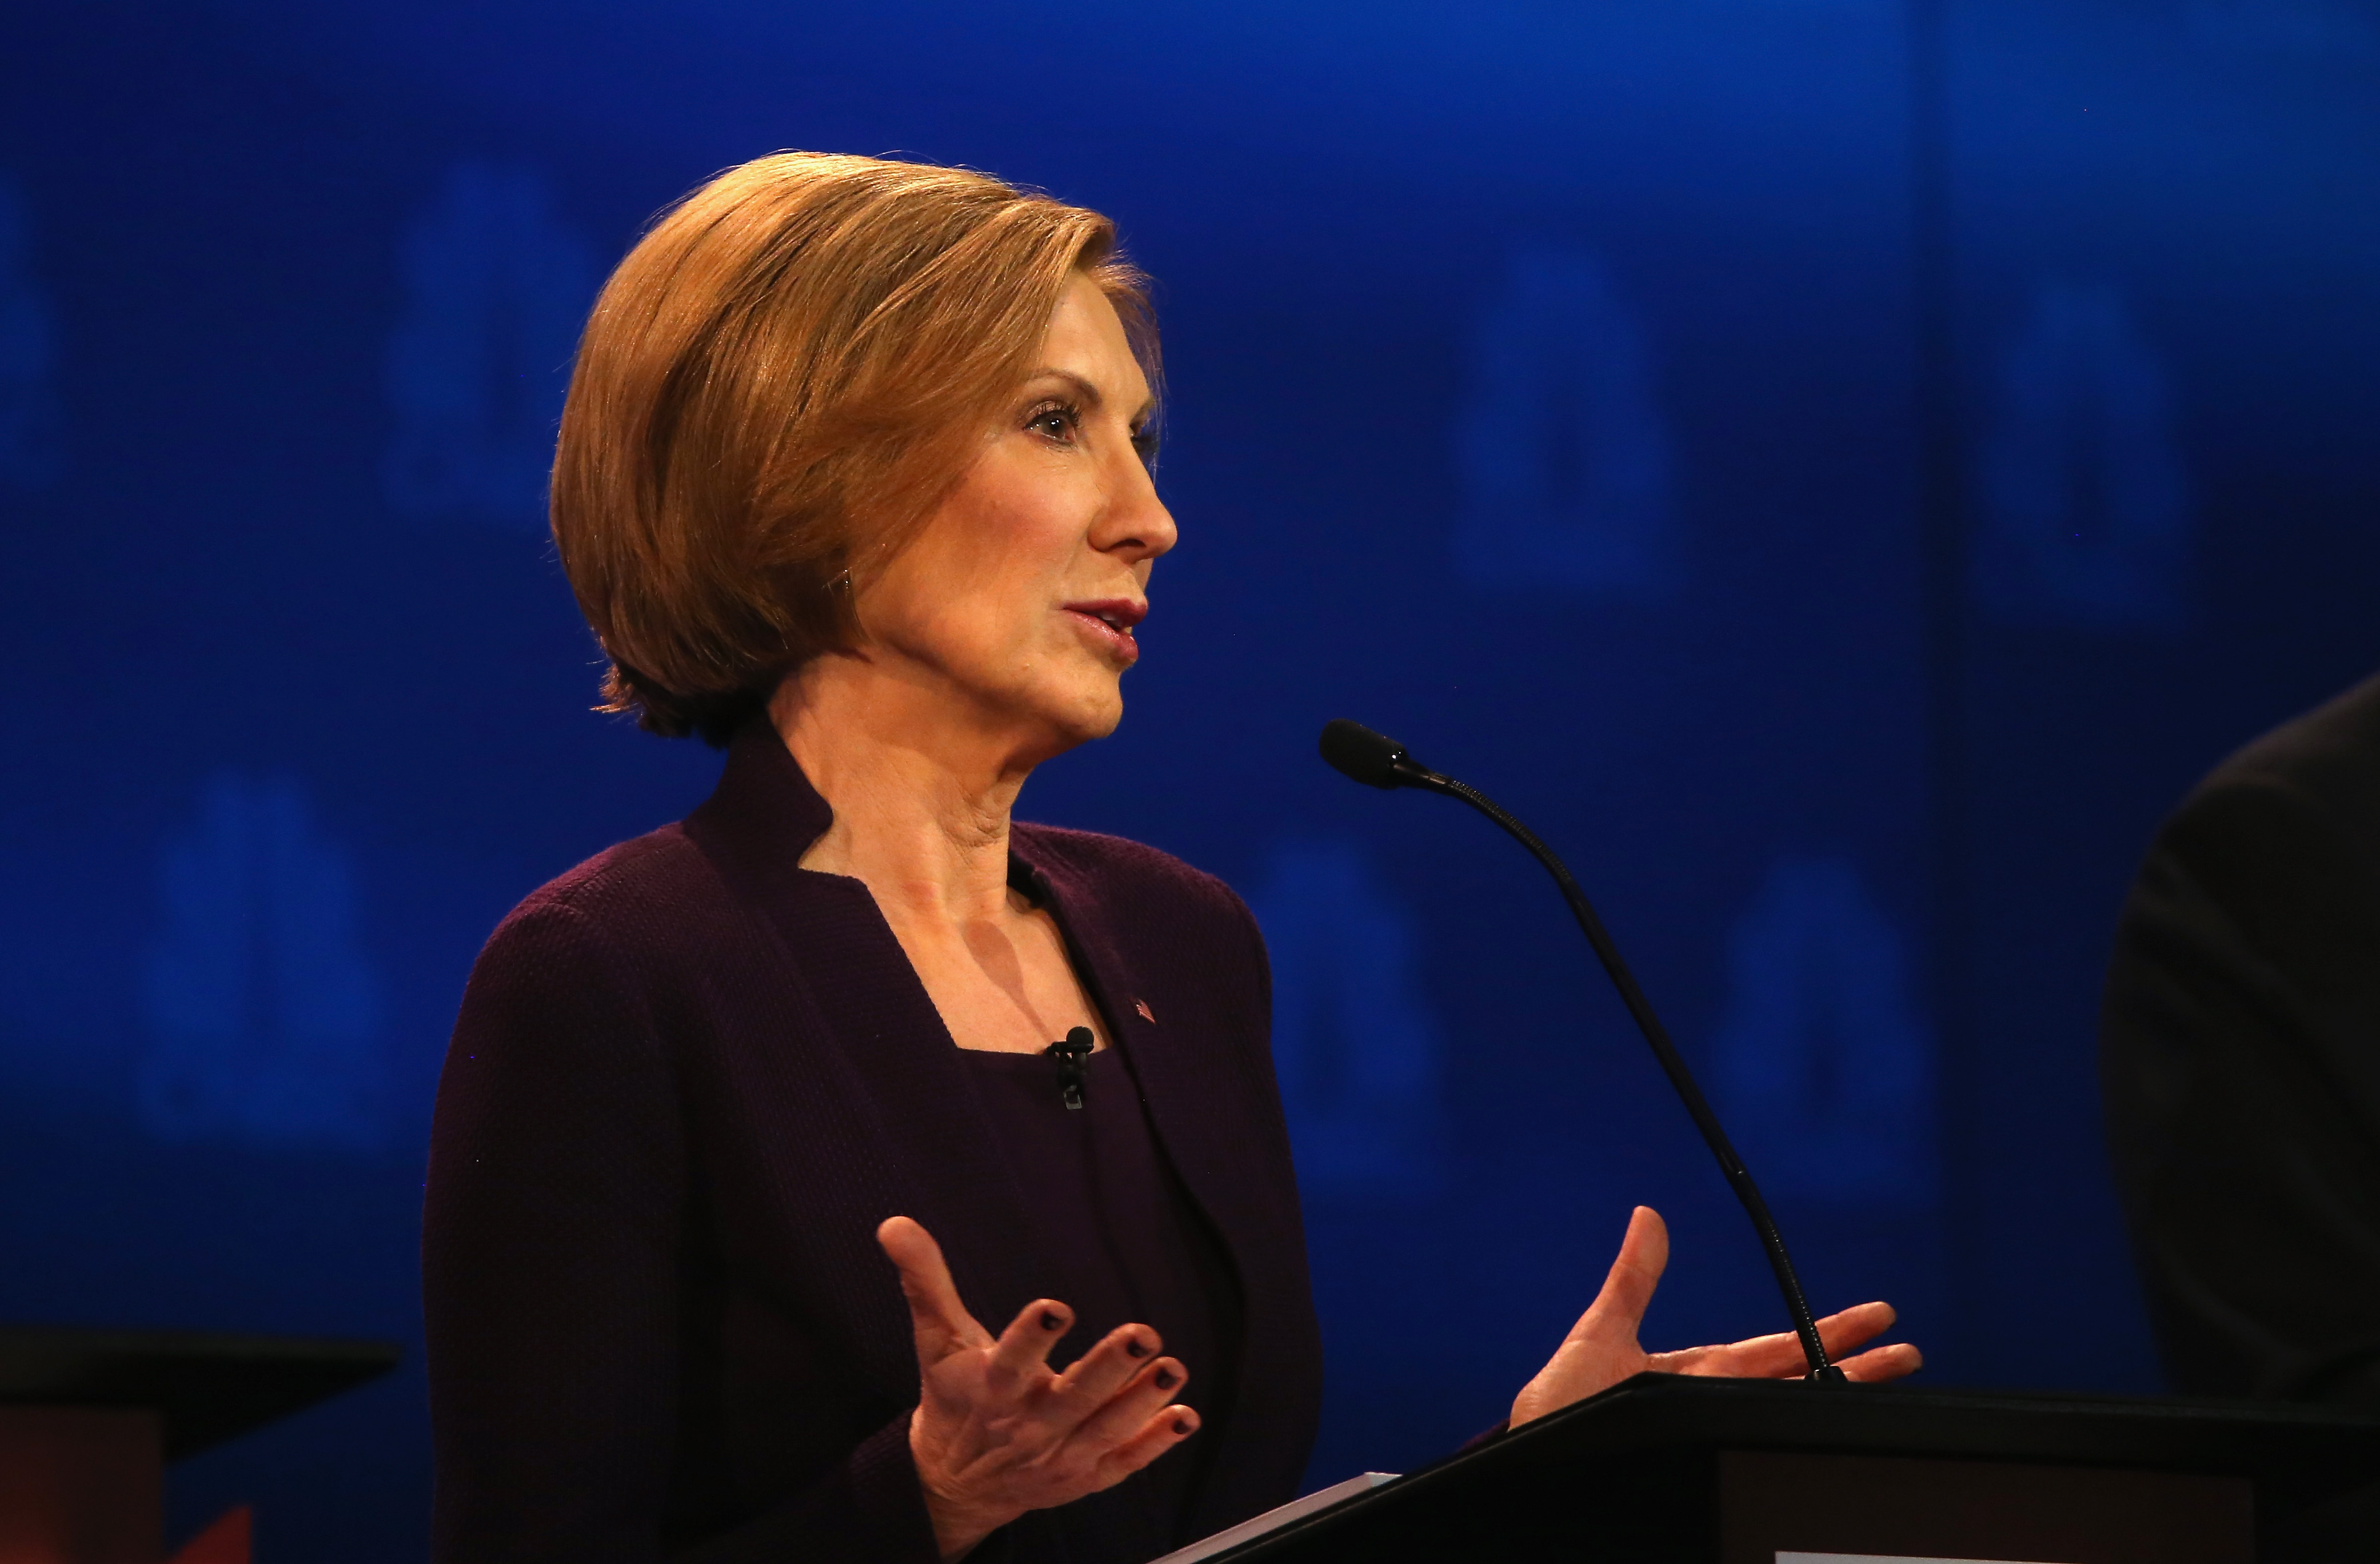 When Carly Fiorina and Donald Trump grappled, the 